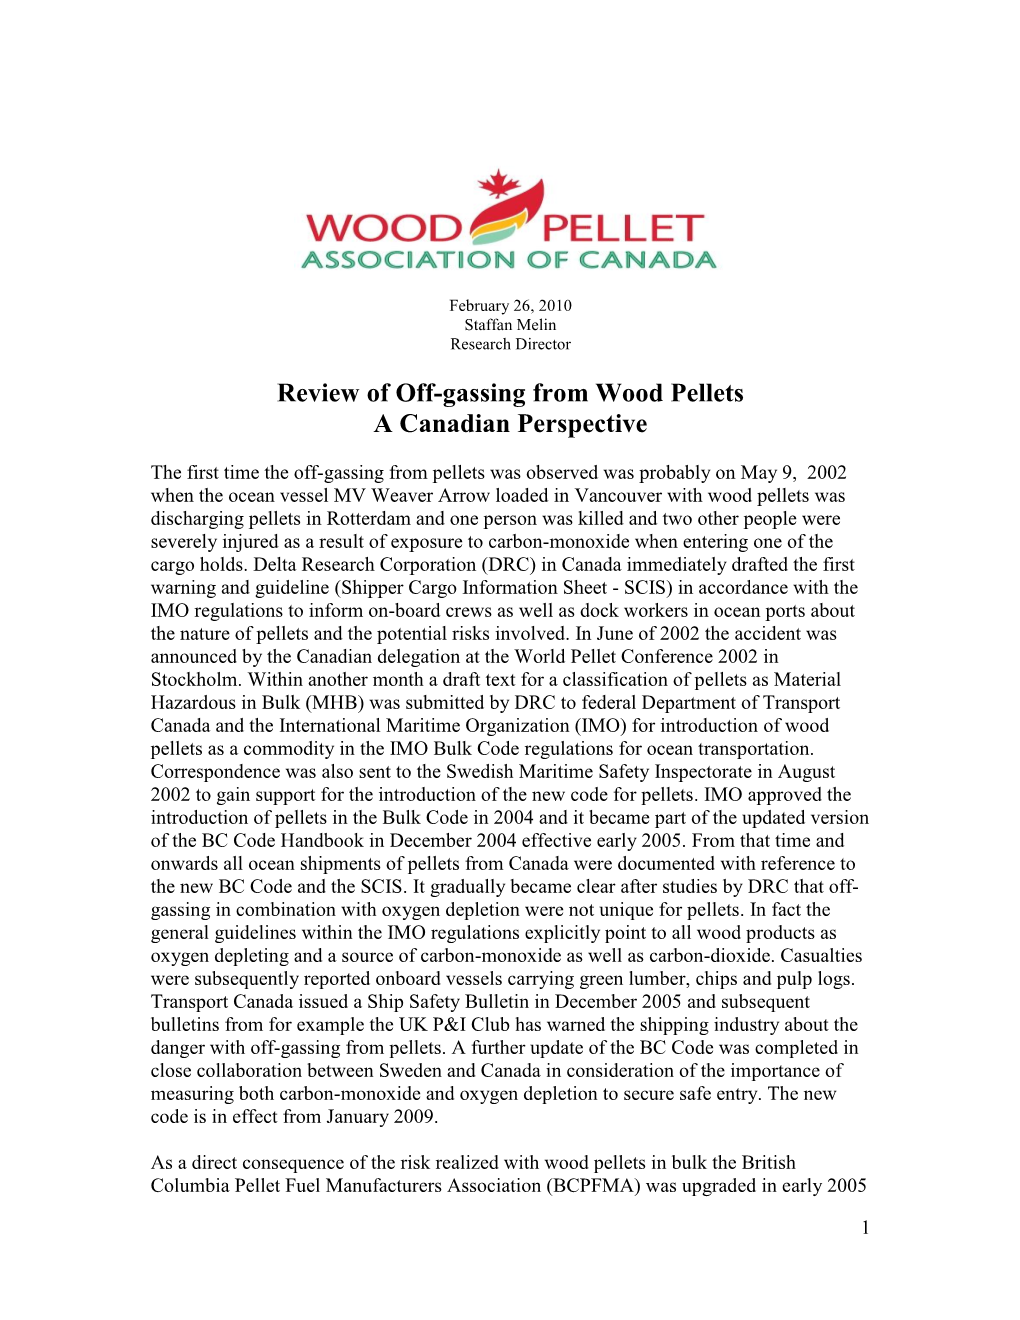 Review of Off-Gassing from Wood Pellets a Canadian Perspective